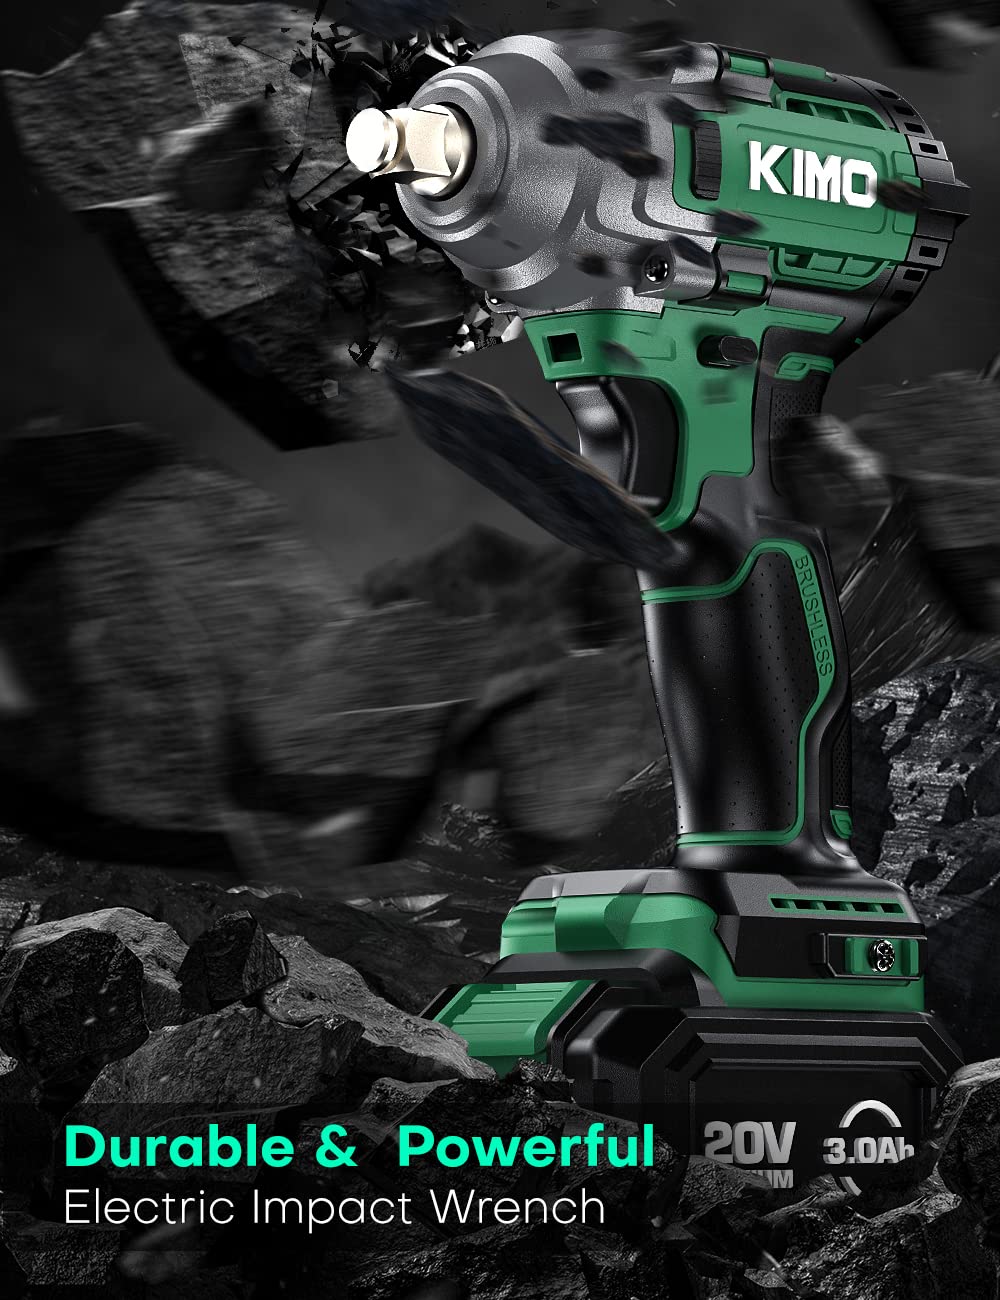 KIMO Cordless Impact Wrench, 3000 RPM, 1/2 Impact Gun with 3.0Ah Li-ion Battery, 7 Drive Impact Sockets, 3 Inch Extension Bar, 1 Hour Fast Charger,1/2 Impact Driver w/Max Torque 260 ft-lbs (350N.m)